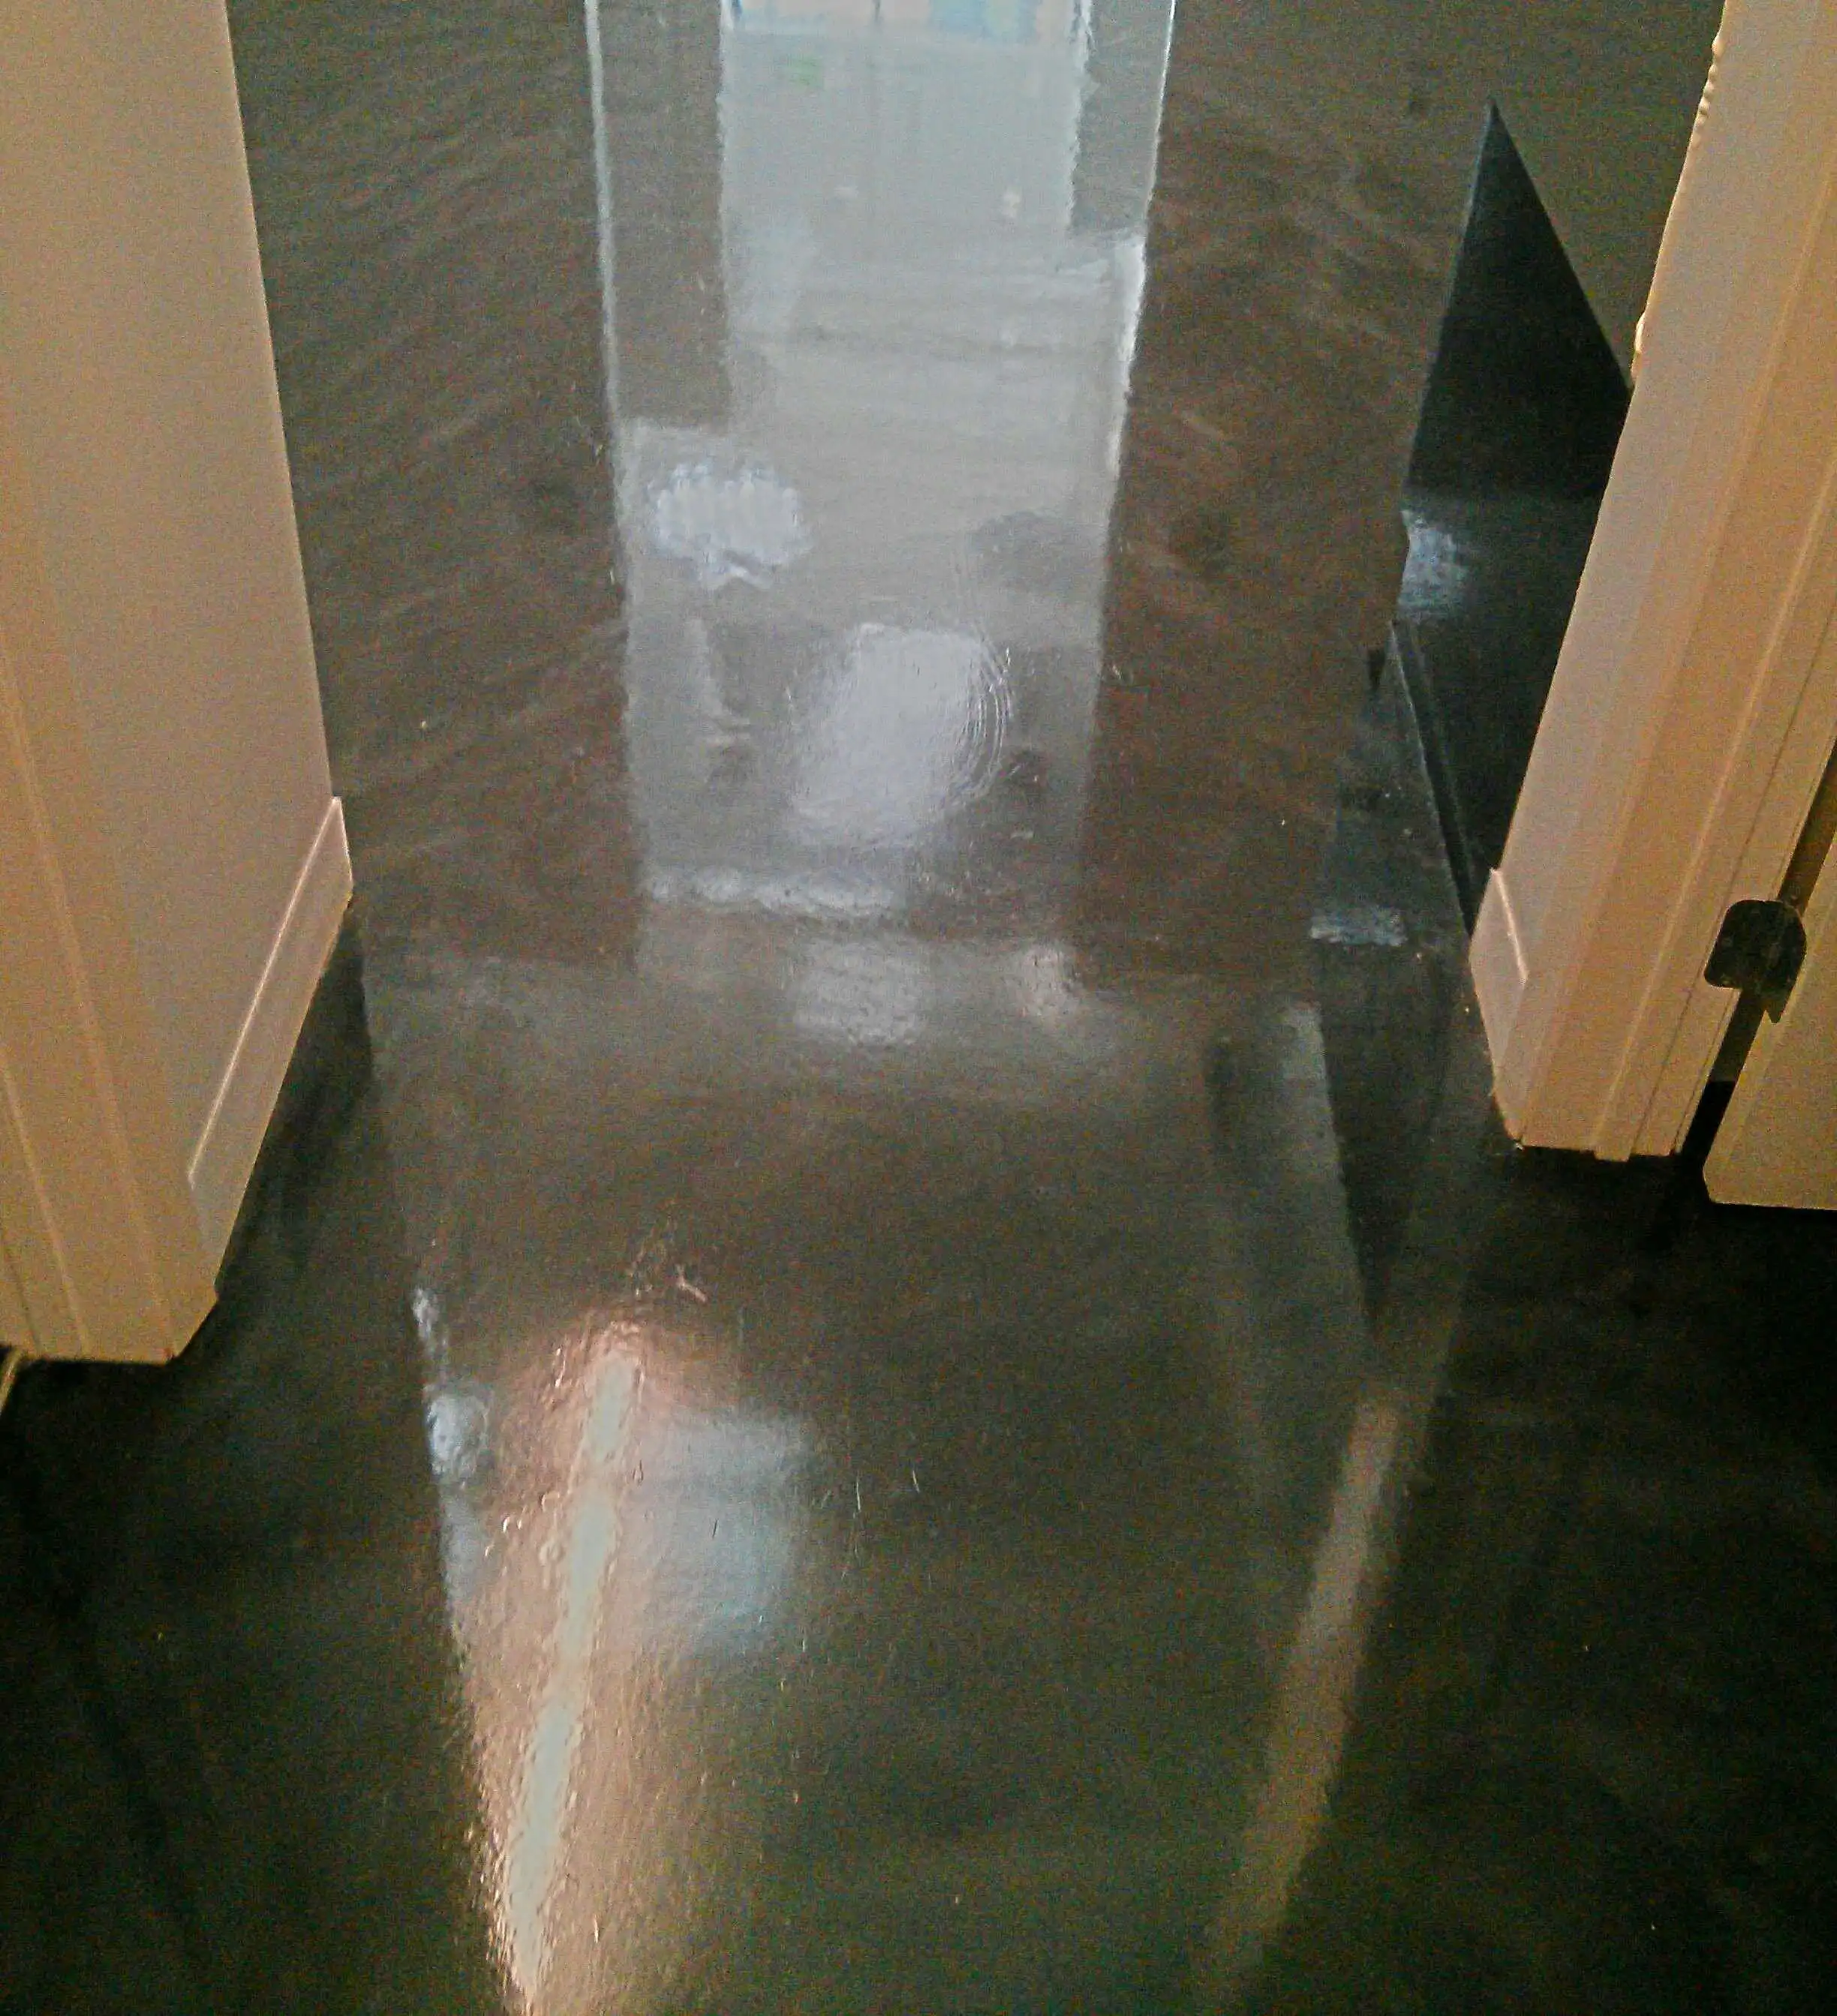 polished-concrete-floor-gets-much-needed-scrub-and-recoat-in-wayzata